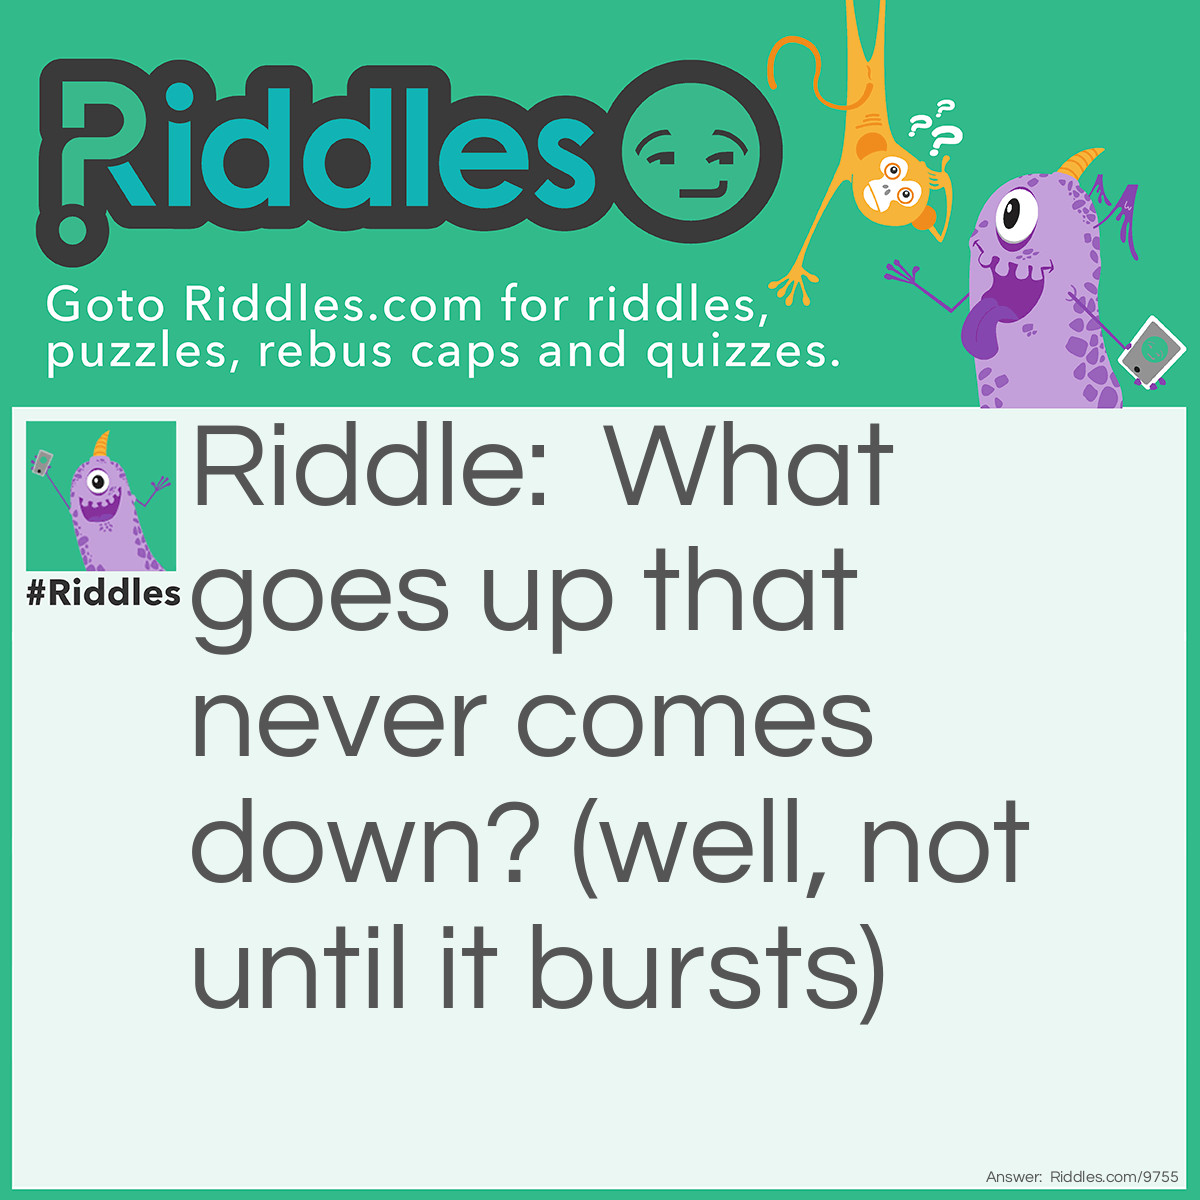 Riddle: What goes up that never comes down? (well, not until it bursts) Answer: A balloon.